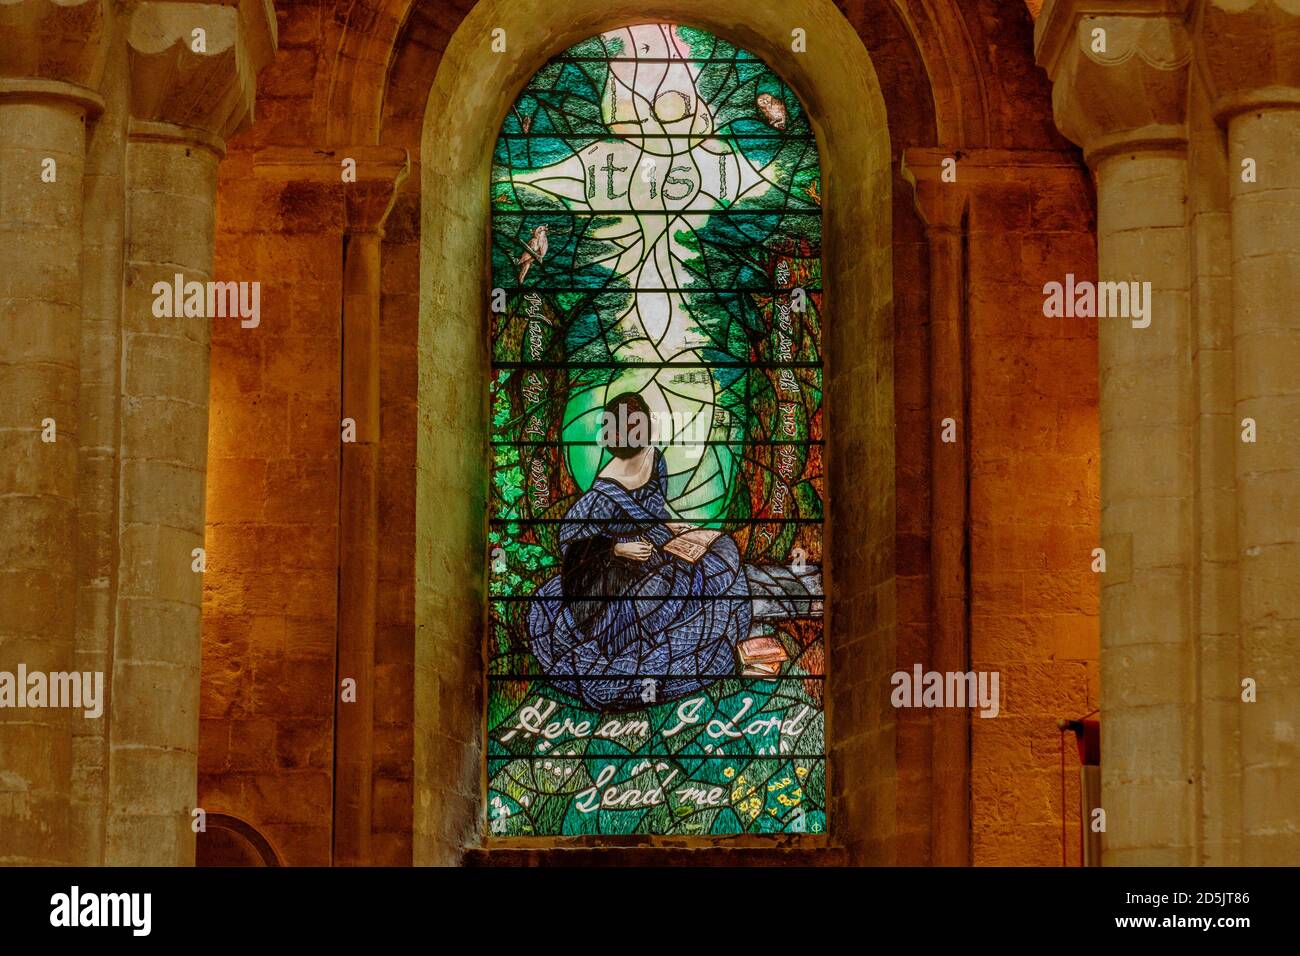 ROMSEY, HAMPSHIRE, UK OCTOBER 13, 2020. The newly installed 'Calling Window' depicting nurse and social reformer, Florence Nightingale at Romsey Abbey in Hampshire, UK Tuesday October 13, 2020. Created by artist Sophie Hacker the stained glass window is a celebration of the 'Lady of the Lamp' born 200 years ago this year. A service to mark the occasion was postponed due to the Covid pandemic and is rescheduled for May 16, 2021. Nightingale grew up at nearby Embley Park, near Romsey, Hampshire Photograph Credit: Luke MacGregor/Alamy Live News Stock Photo